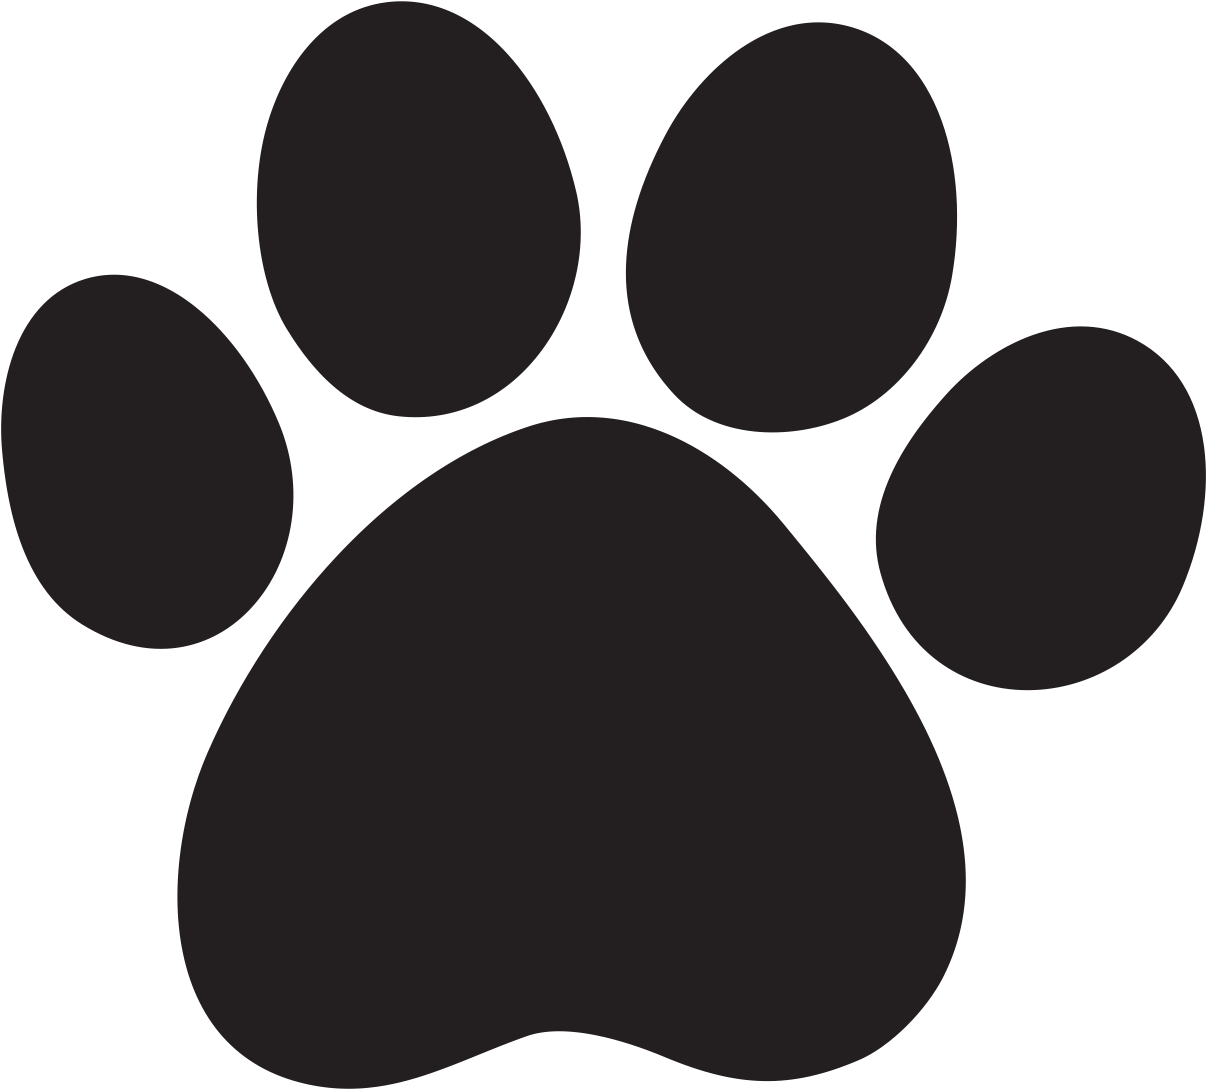 Download Cat Paws Png Hd - Dog Paw Print Clip Art PNG Image with No